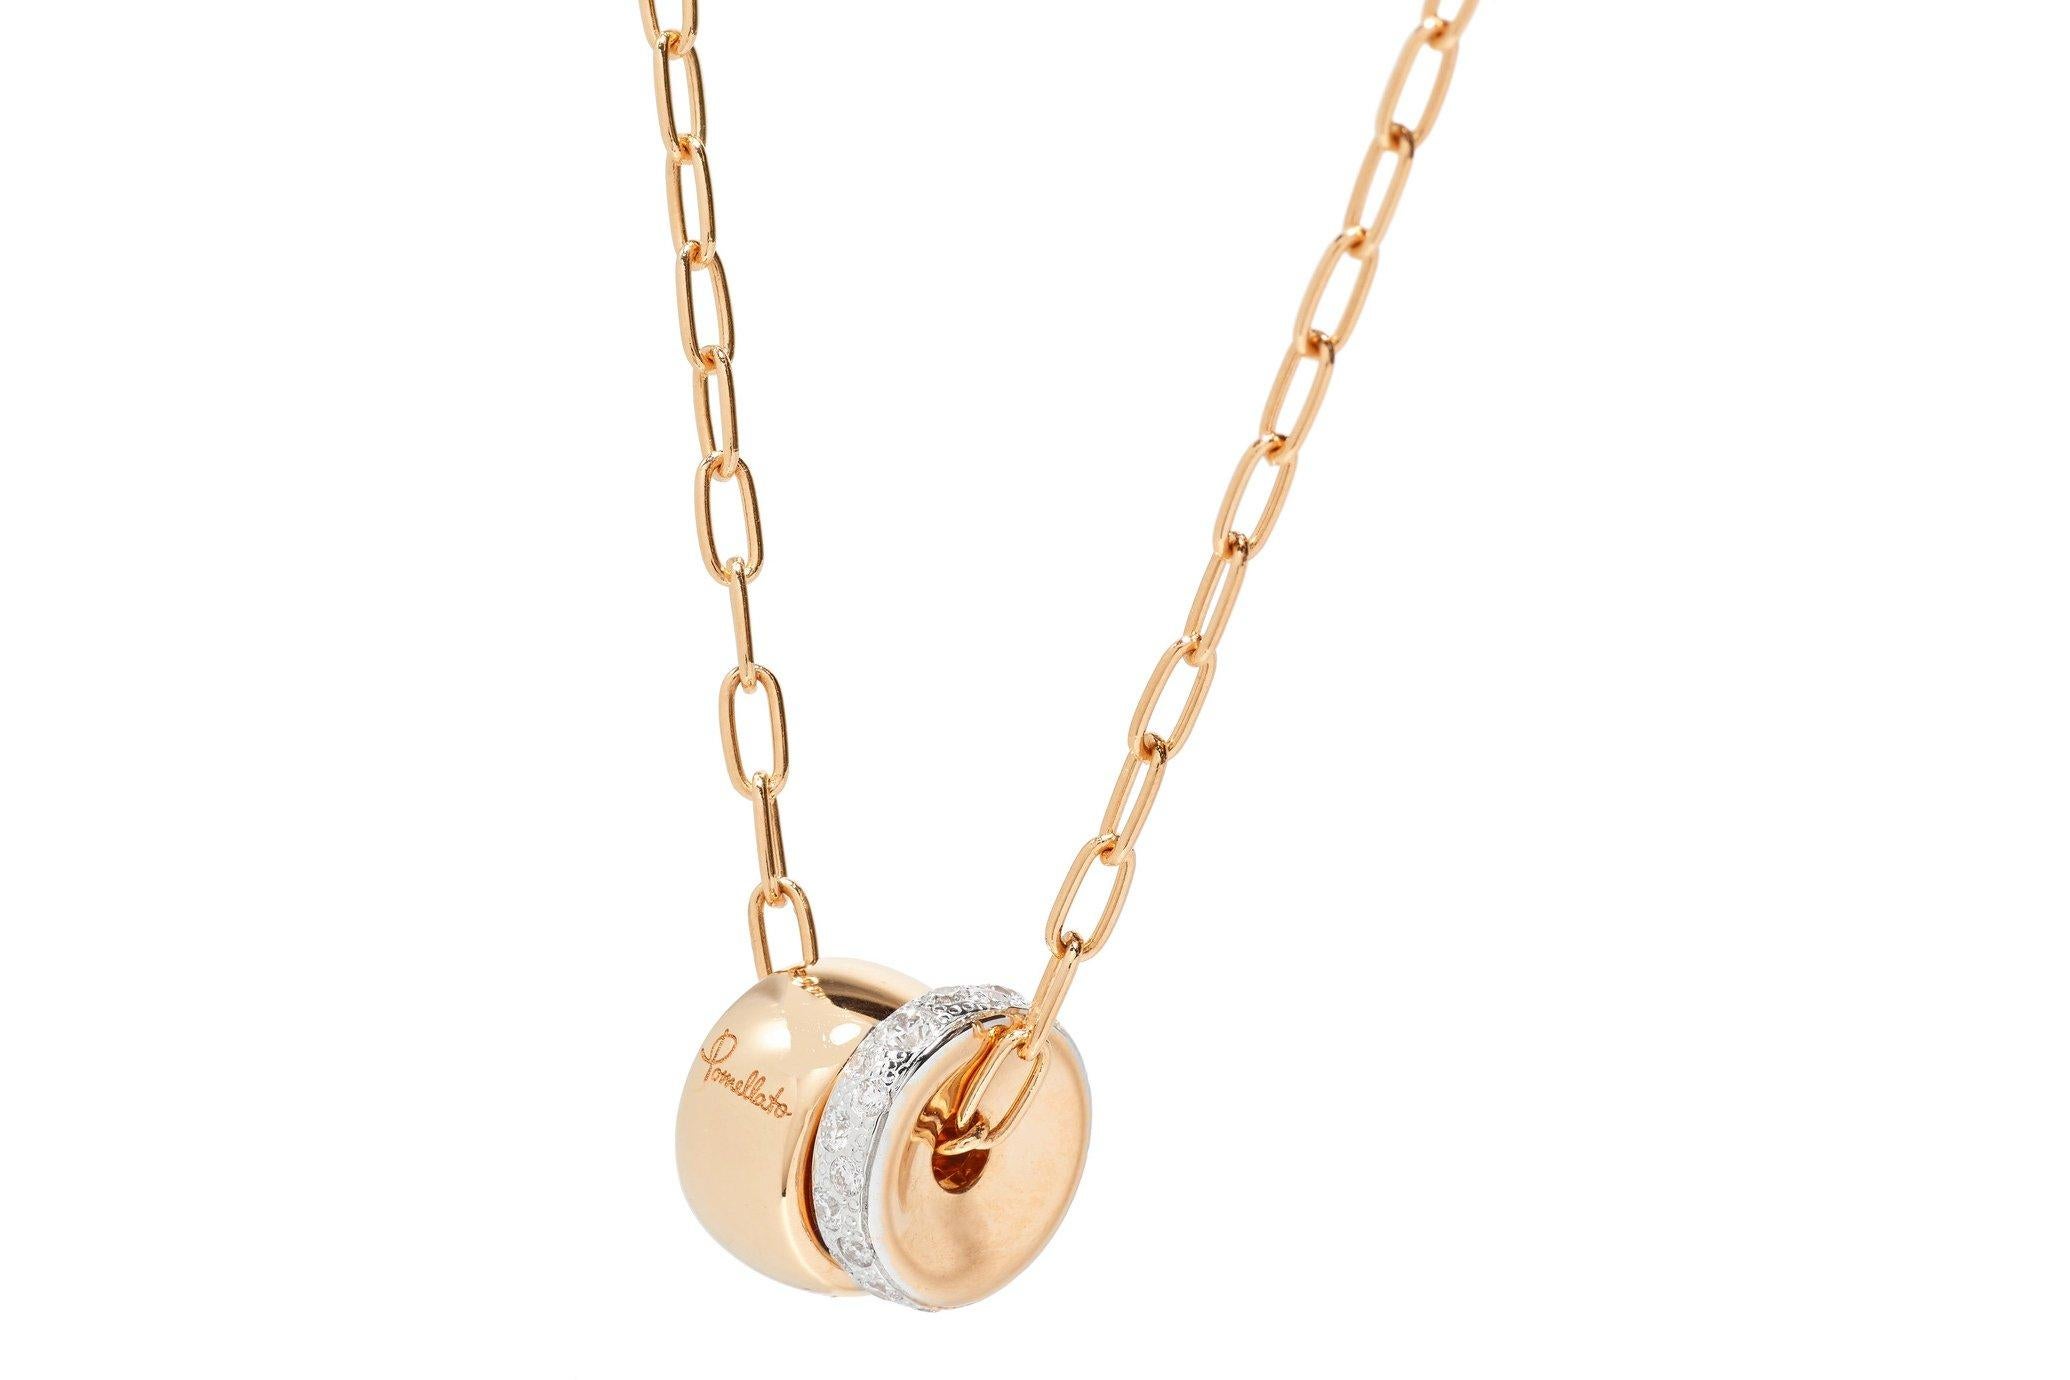 ICONICA PENDANT IN ROSE GOLD AND PAVE SET DIAMONDS 
Honoring Pomellato’s goldsmith heritage, ICONICA shines in bold pendants of sensual rose gold and white diamonds. Daring, lightweight and stackable, this anniversary collection may be